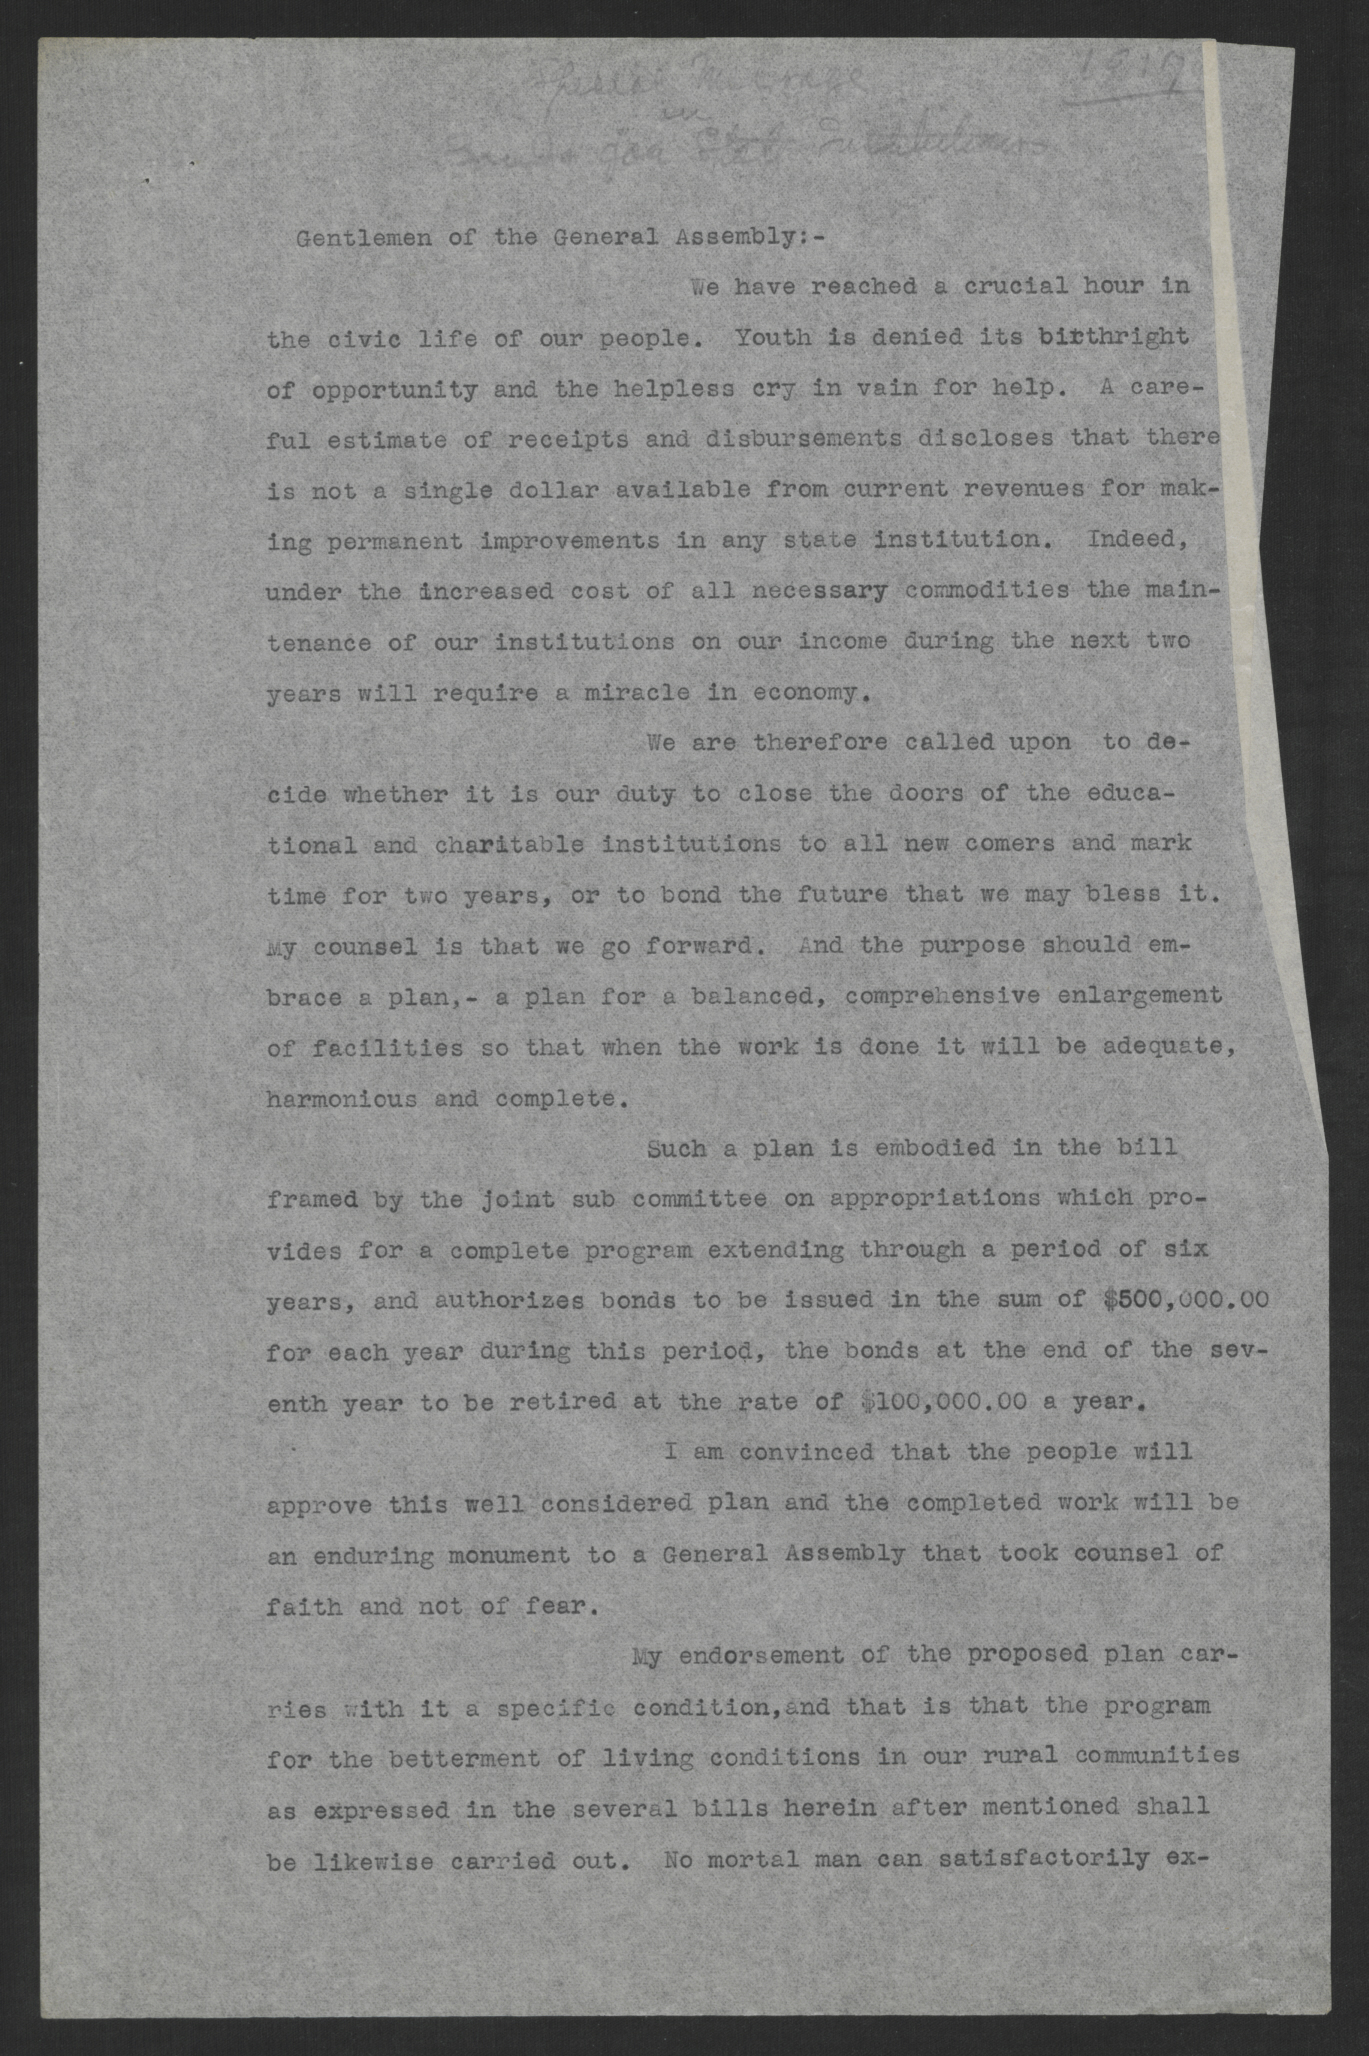 Governor Thomas W. Bickett's Message to the General Assembly, March 1, 1917, page 1